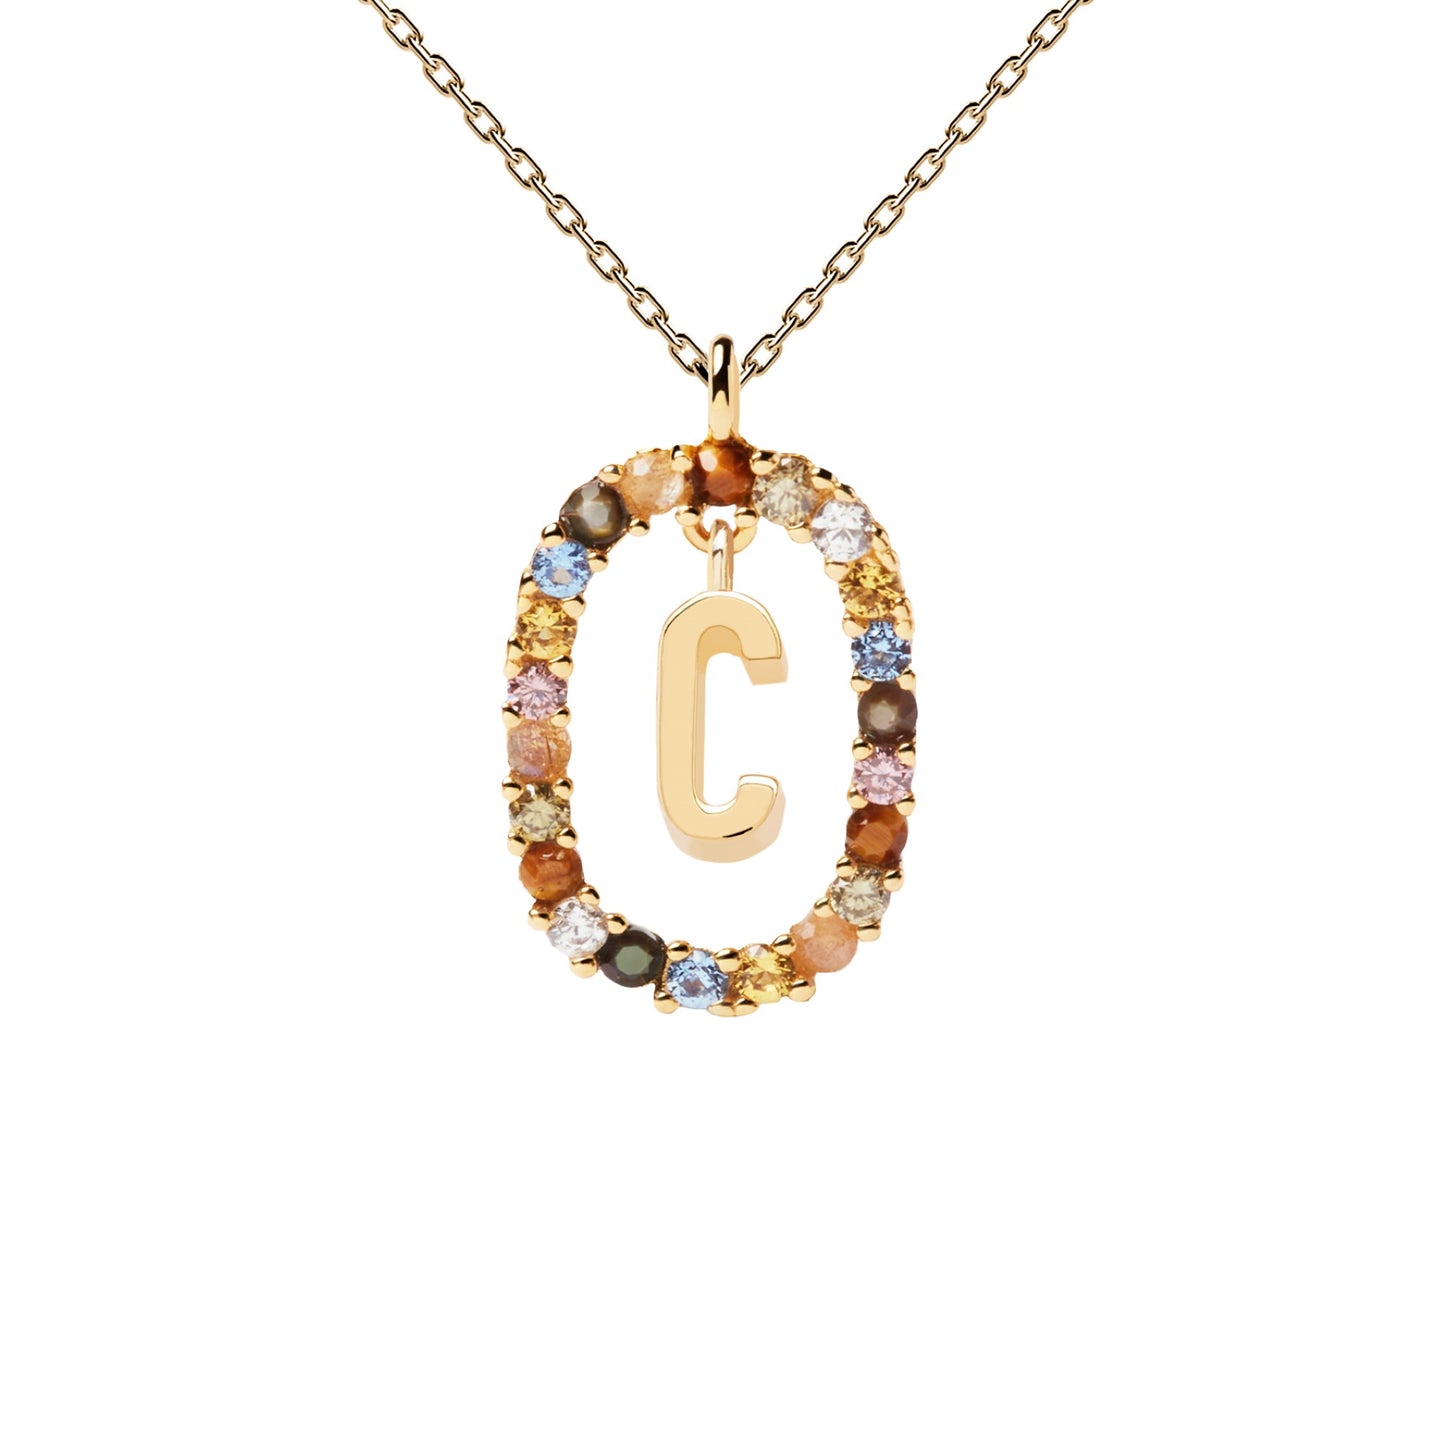 PDPAOLA Yellow Gold Plate Colourful Precious Stones 'C' Initial Necklace